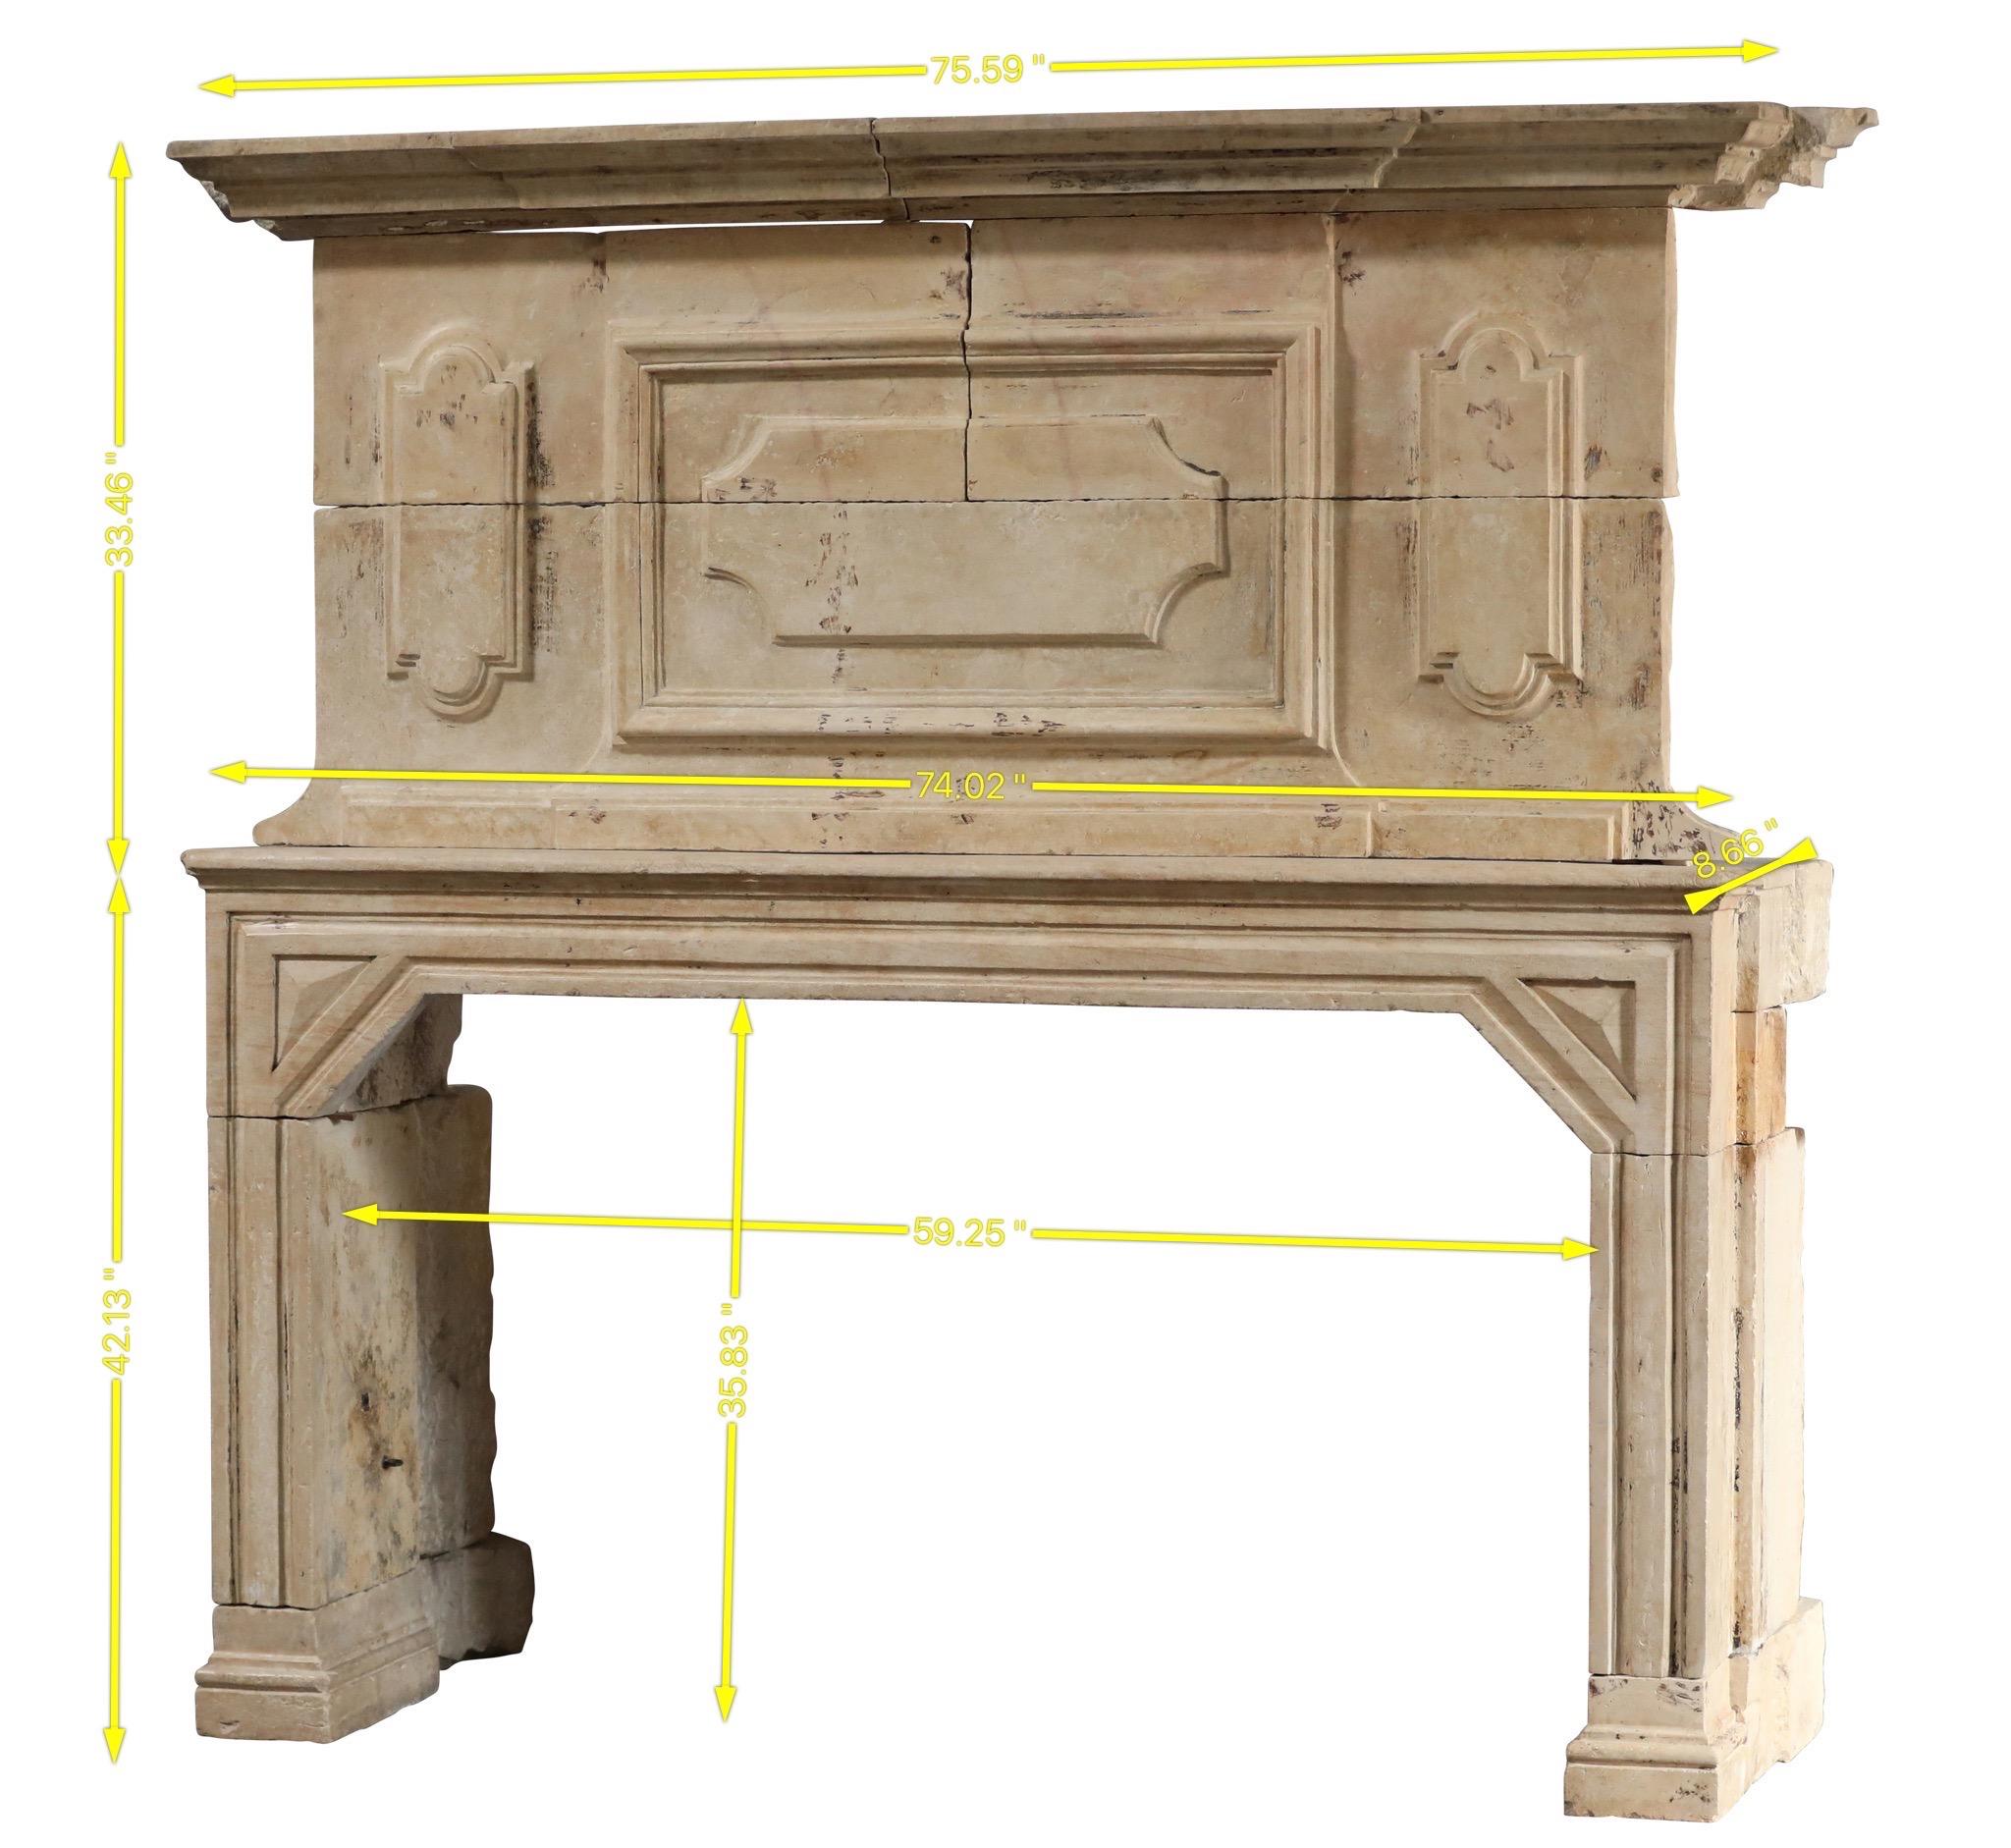 Sensational Timeless Chateau Fireplace Surround For Sale 12